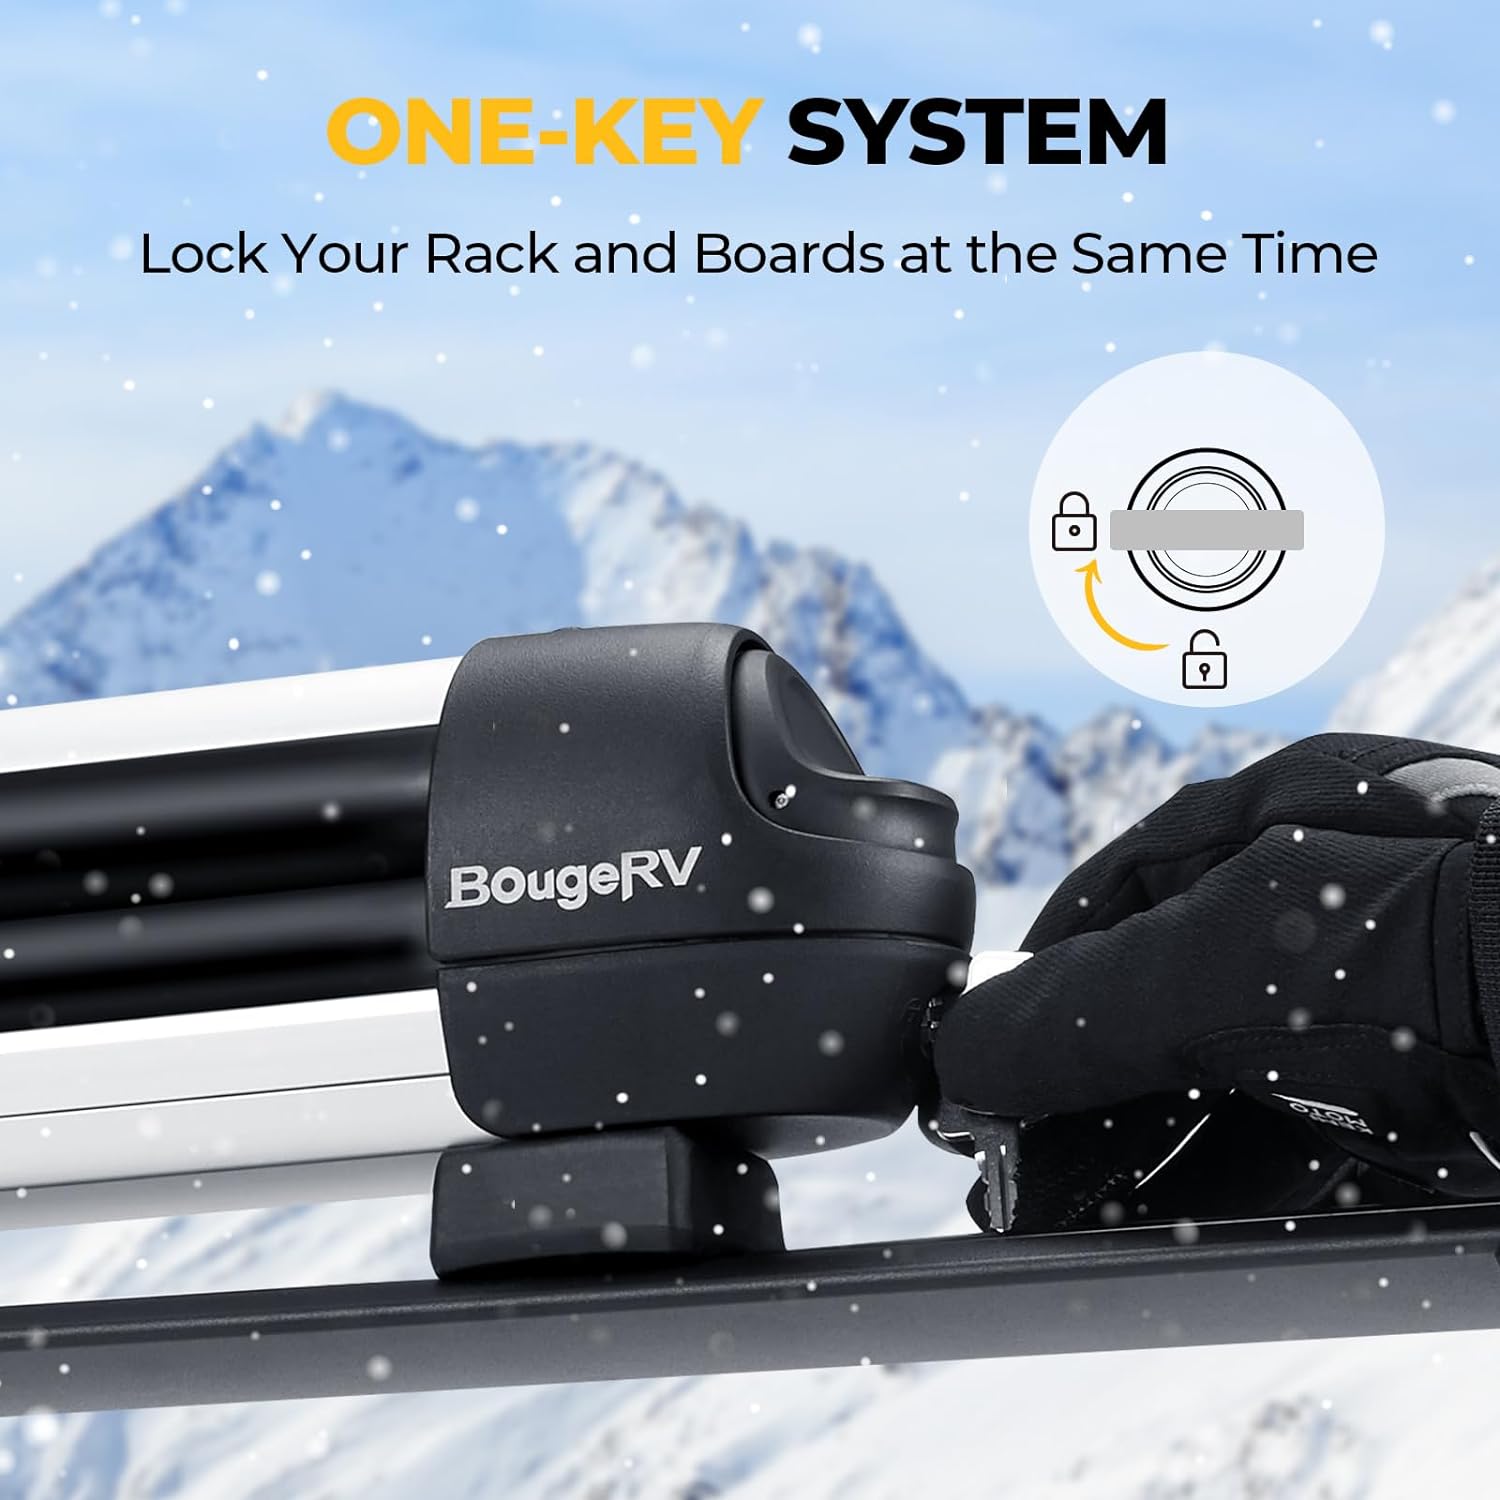 BougeRV Ski And Snowboard Racks Lockable Extension with Sliding Feature